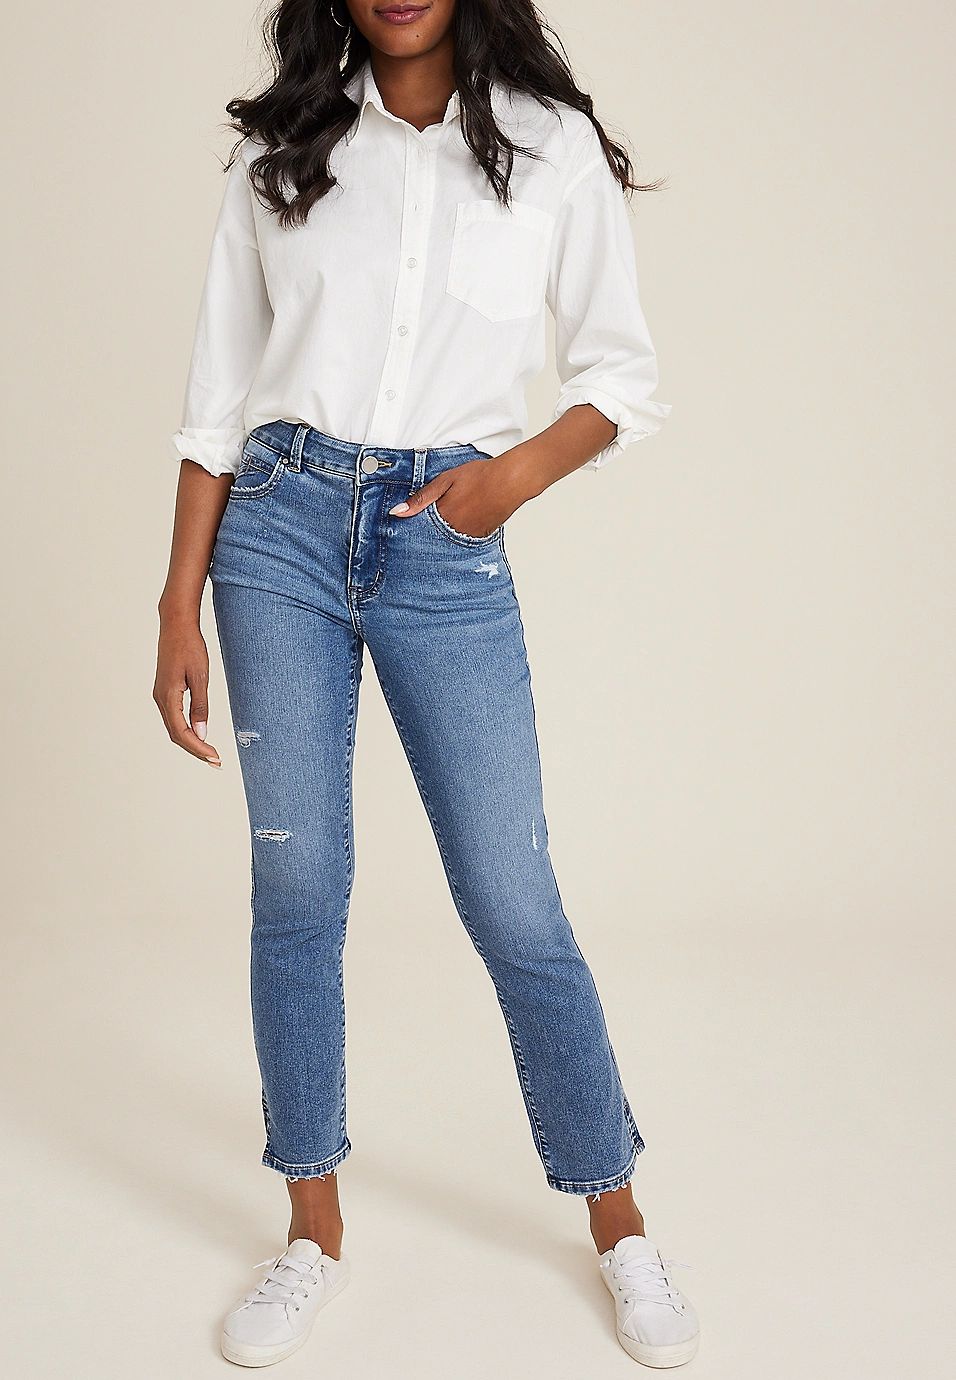 m jeans by maurices™ Everflex™ High Rise Slim Straight Ankle Jean | Maurices